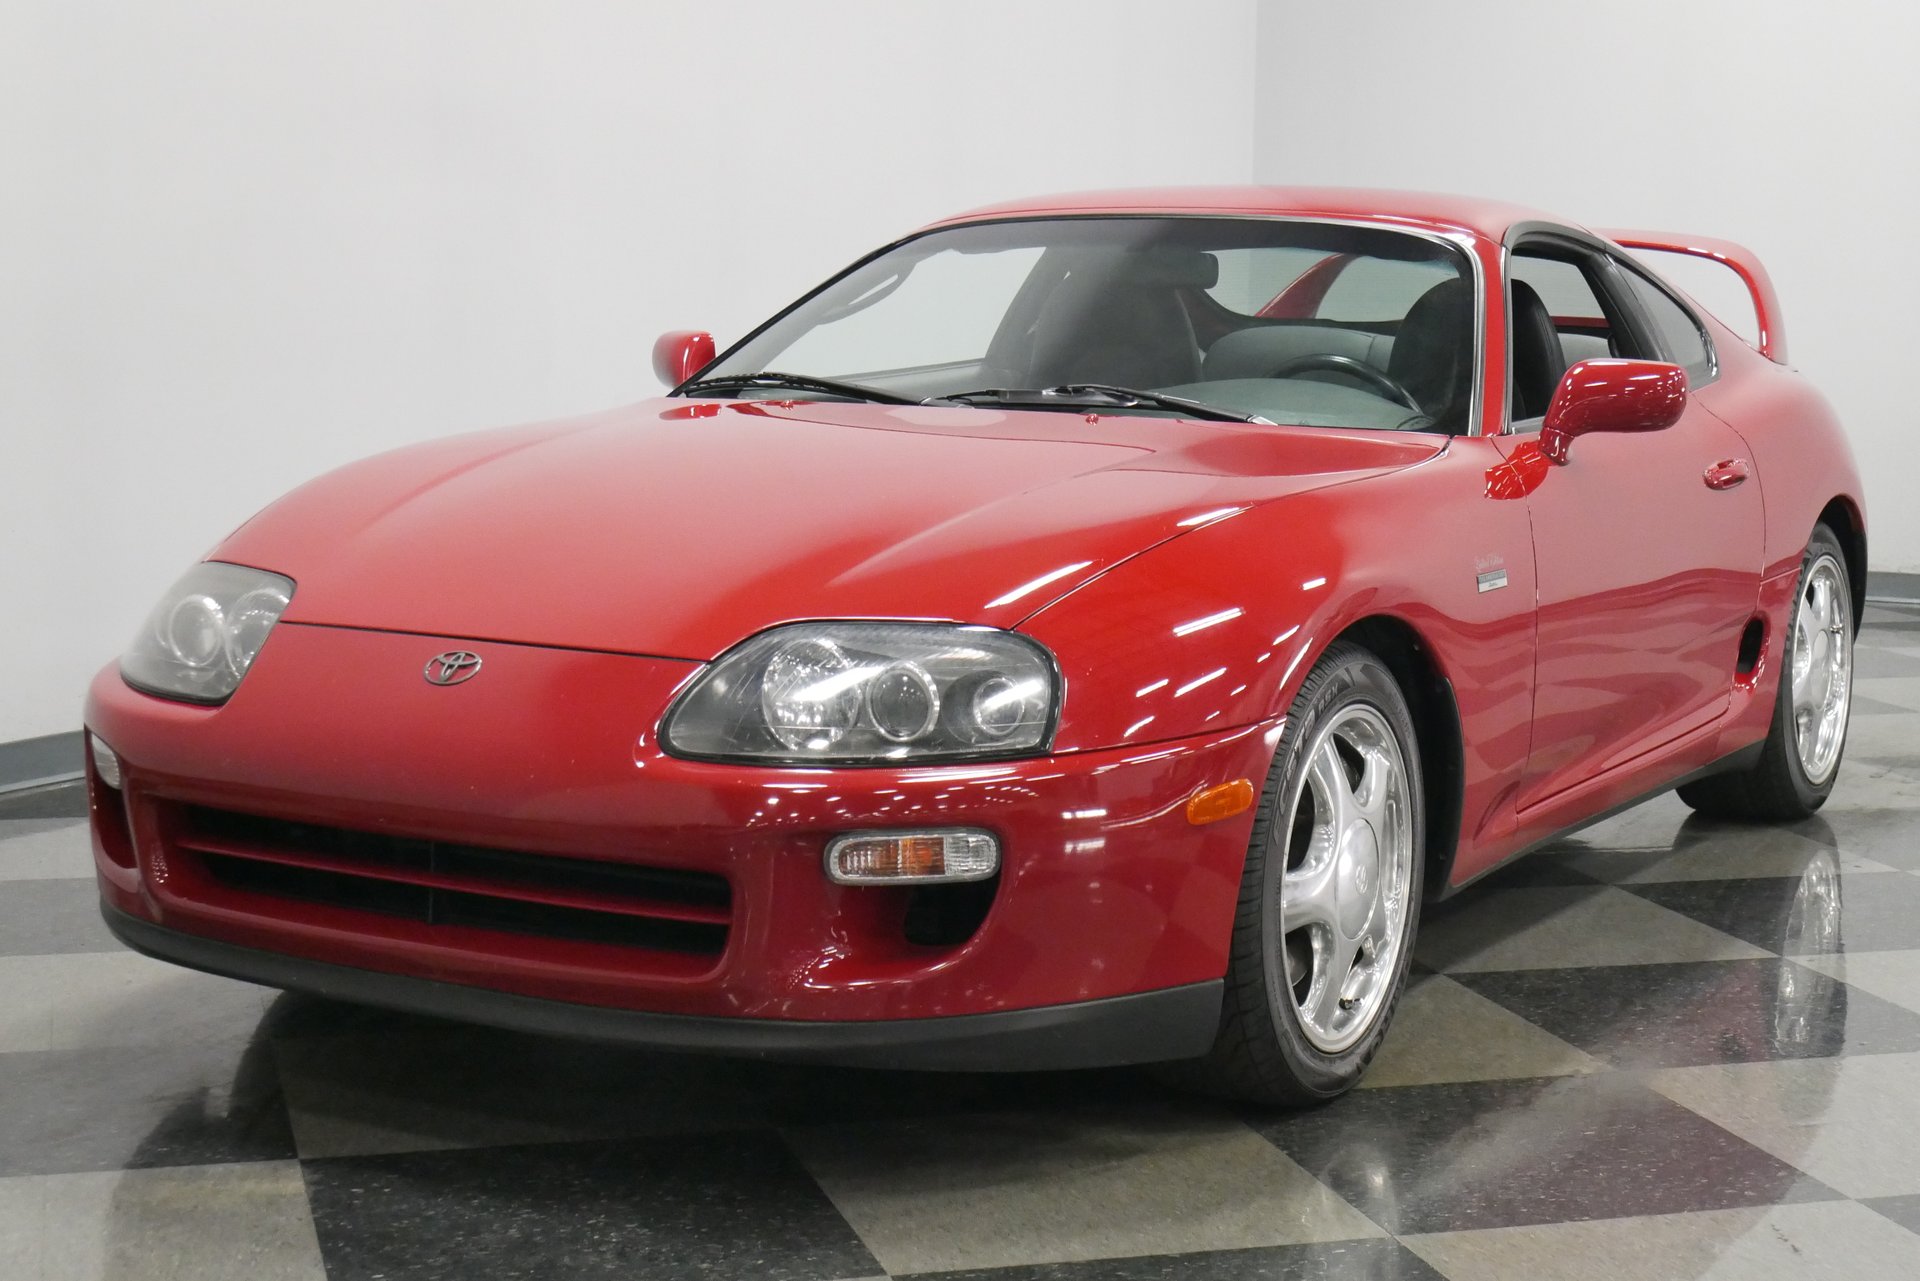 One-Owner 1997 Toyota Supra Mark IV "Time Capsule" Listed for Sal...